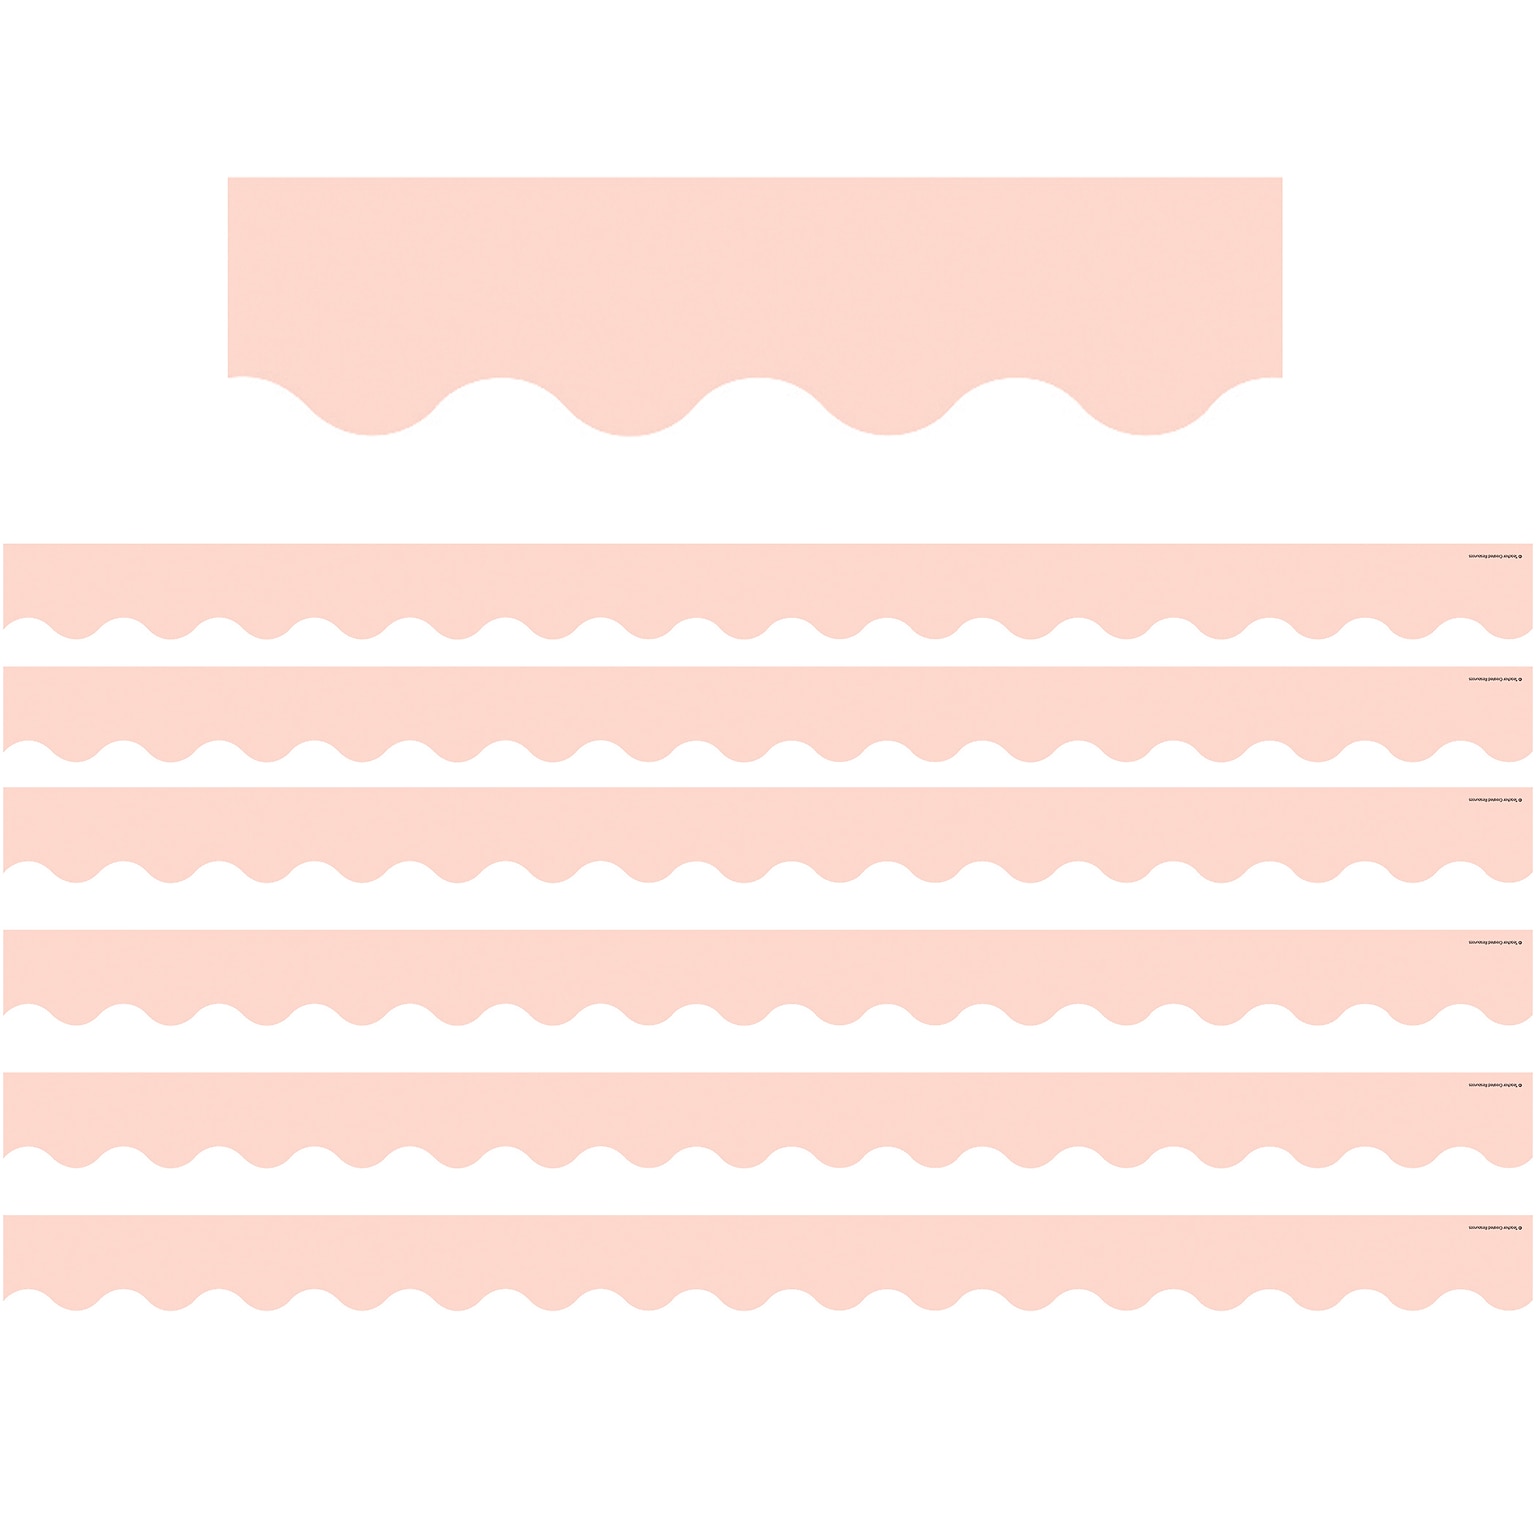 Teacher Created Resources Scalloped Border, 2.19 x 210, Blush Pink (TCR3065-6)